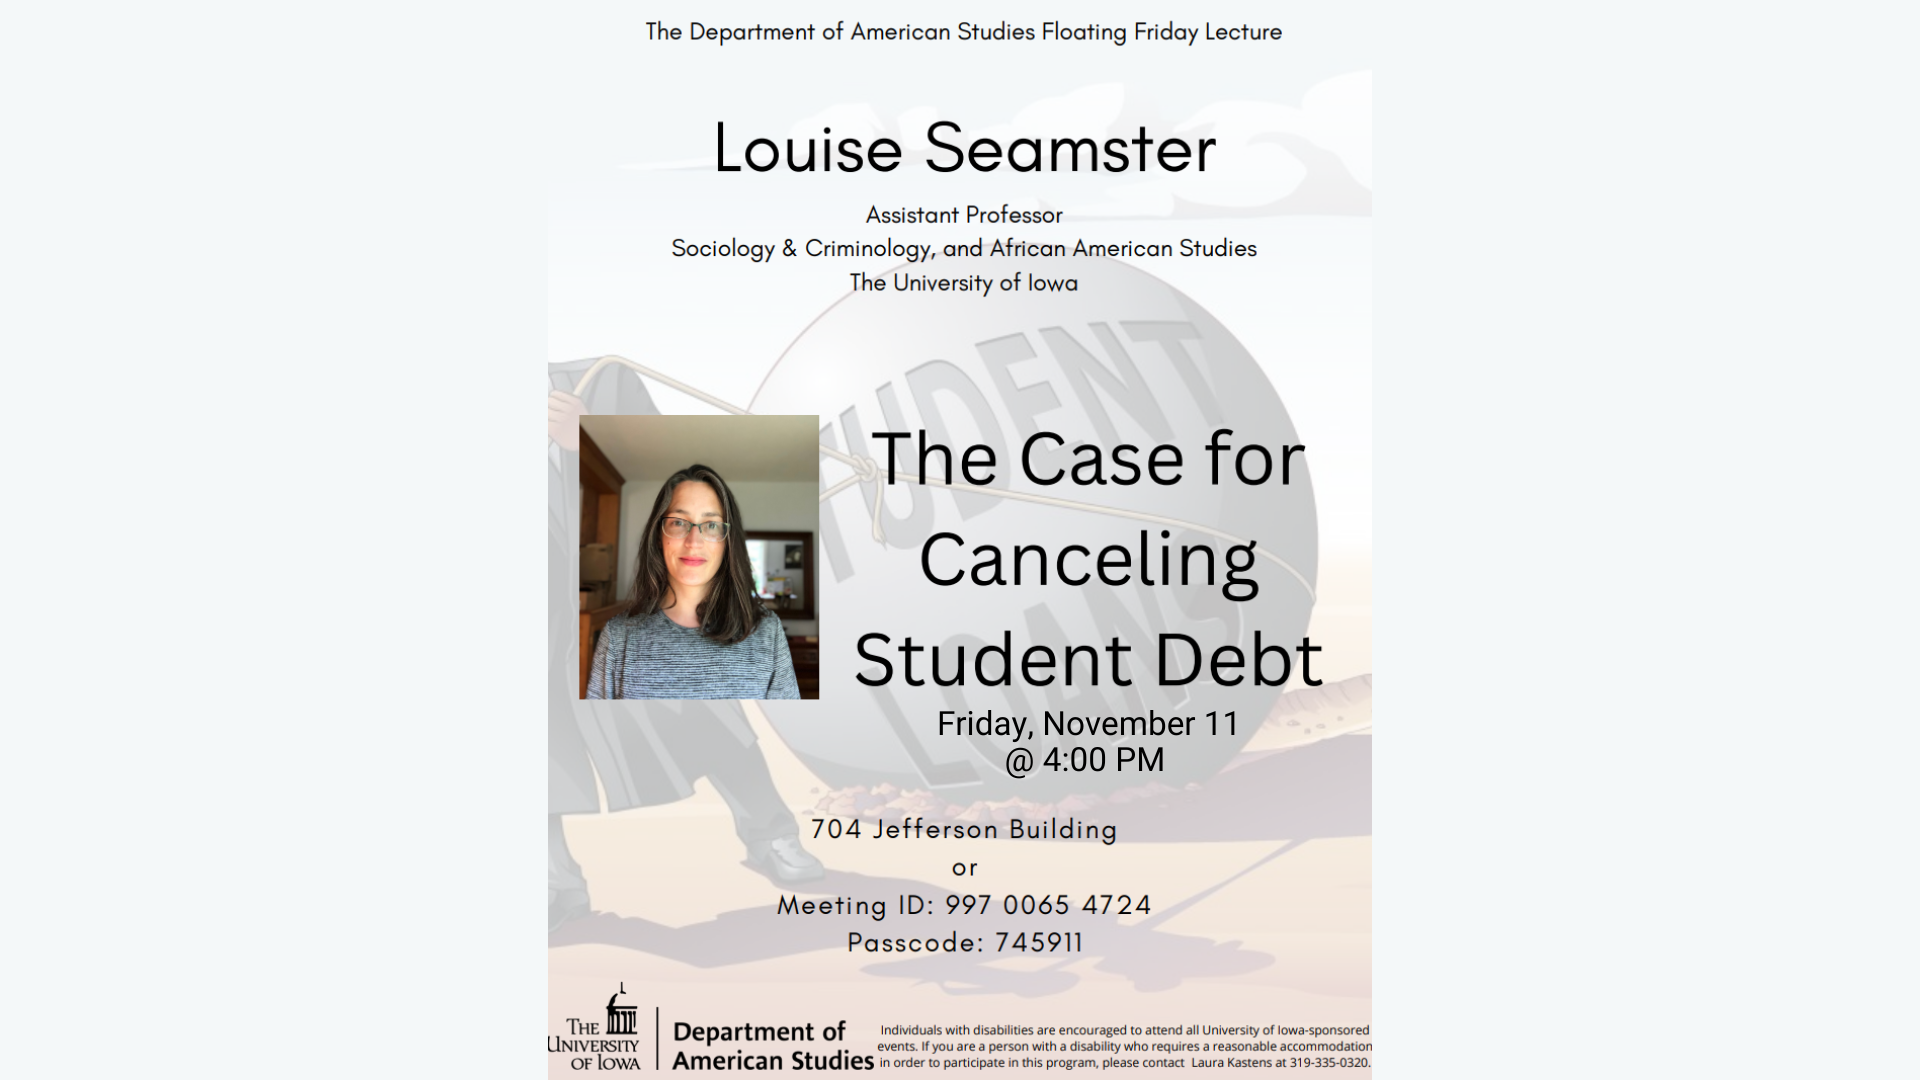 The Case for Cancelling Student Debt, a presentation by Assistant Professor Louise Seamster (Sociology and Criminology, and African American Studies - University of Iowa). Friday, November 11 at 4:00 PM at 704 Jefferson Building or via Zoom: 99700654724, Passcode: 745911 F